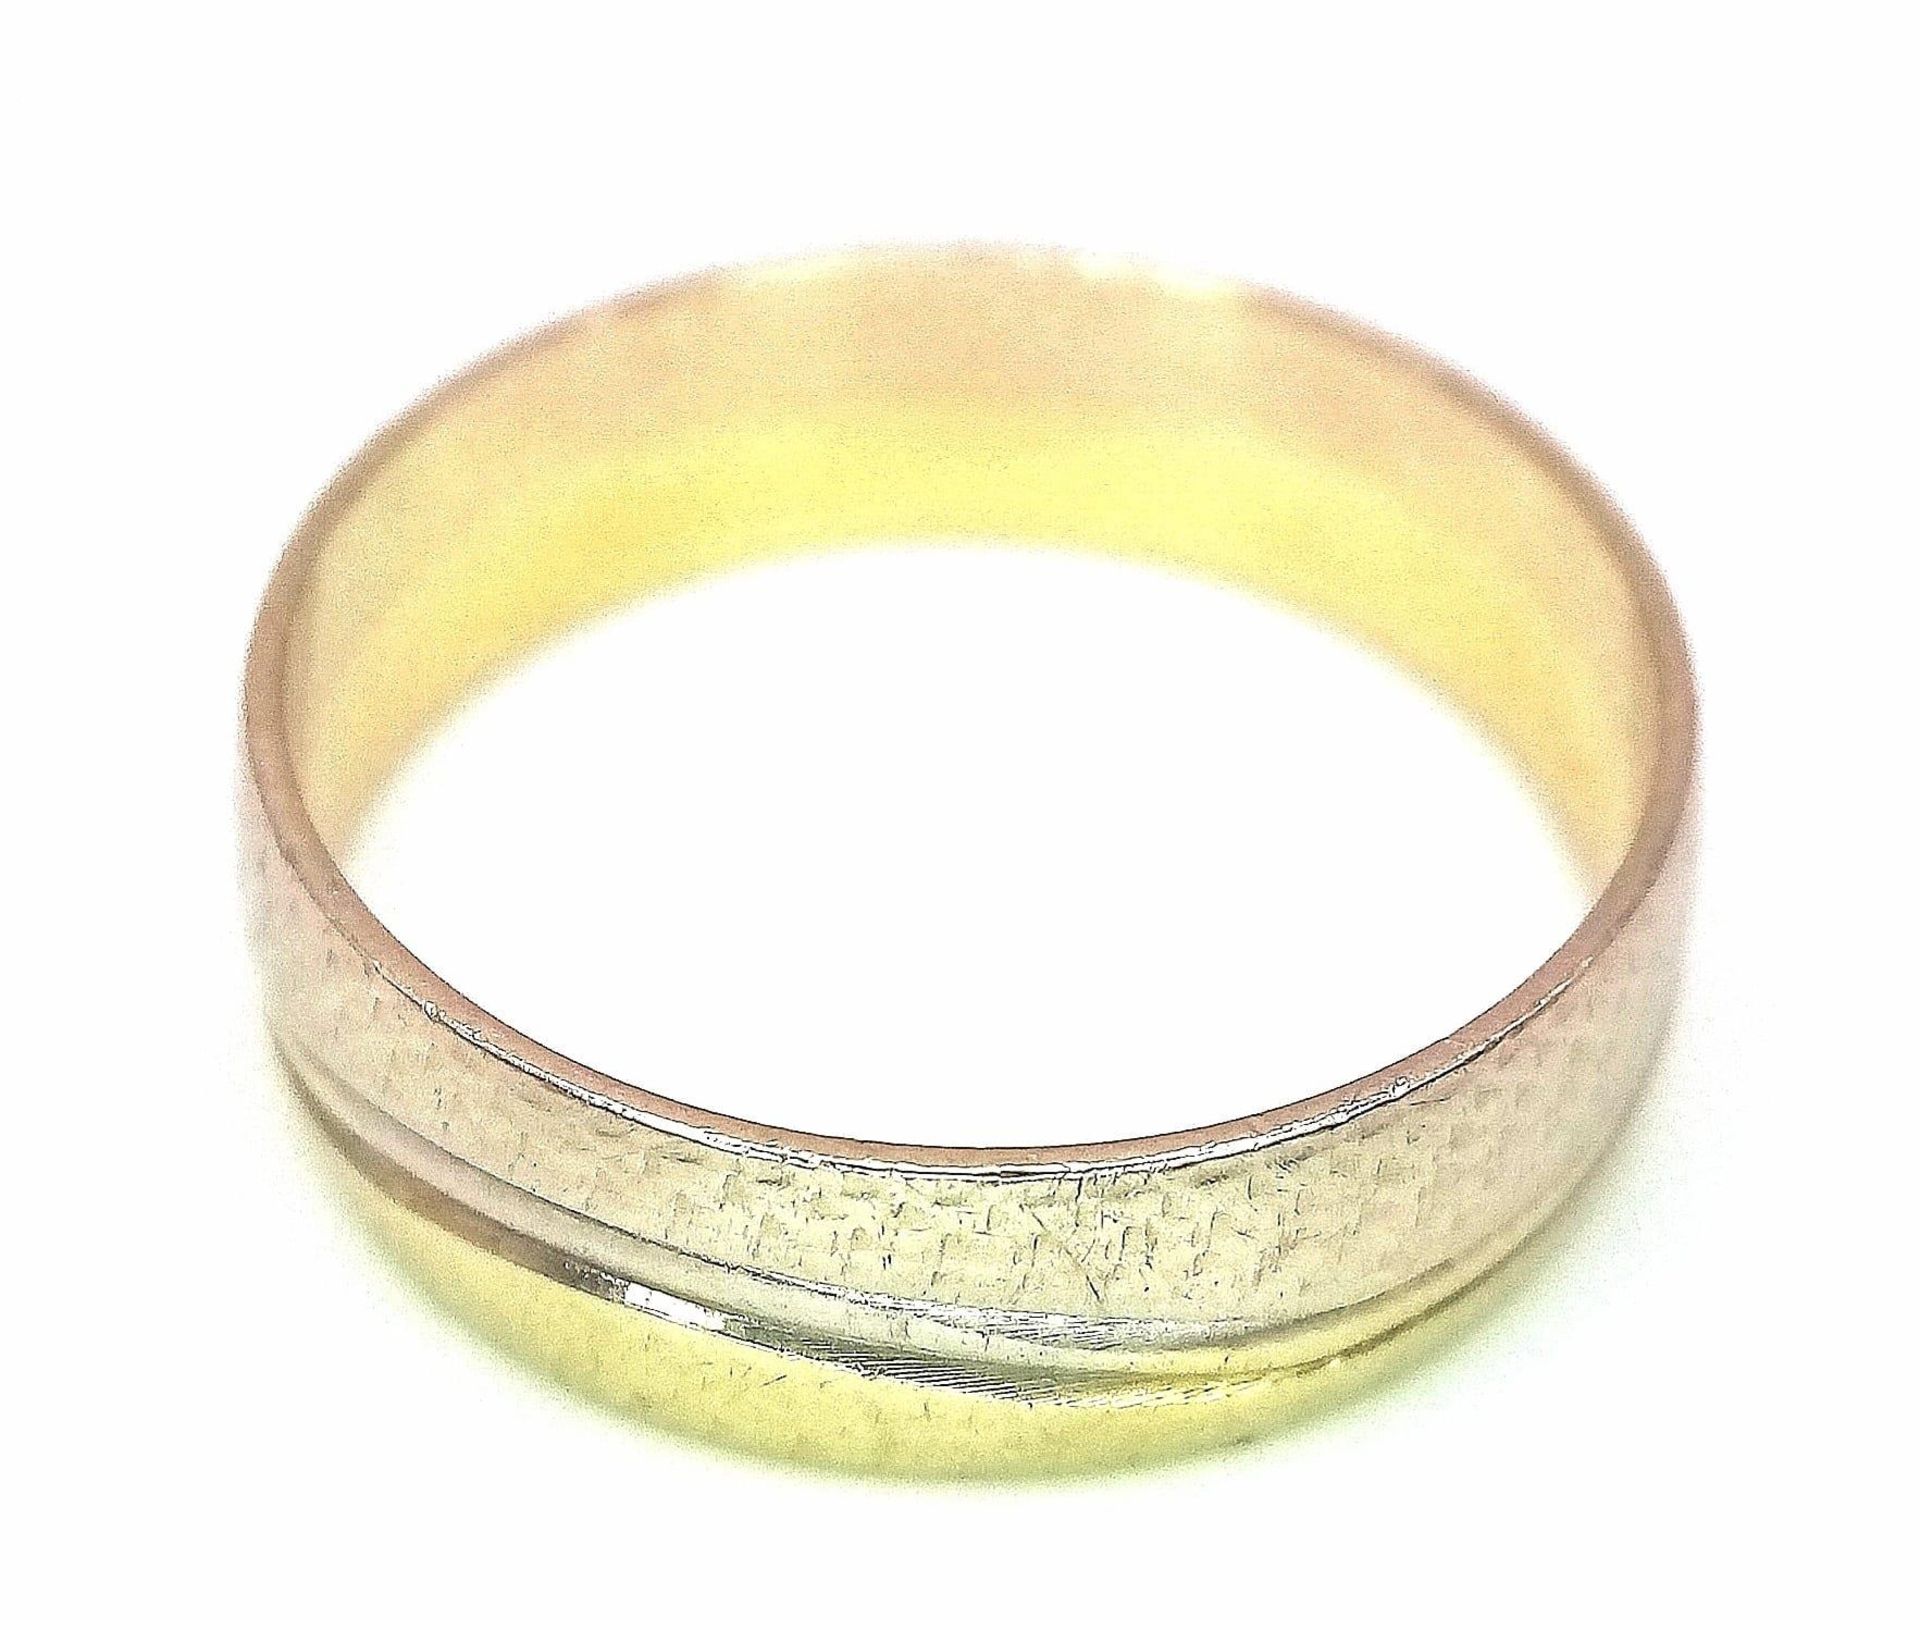 A 14K Yellow Gold Band Ring with Swirl Decoration. Size O. 2.9g weight. - Image 4 of 5